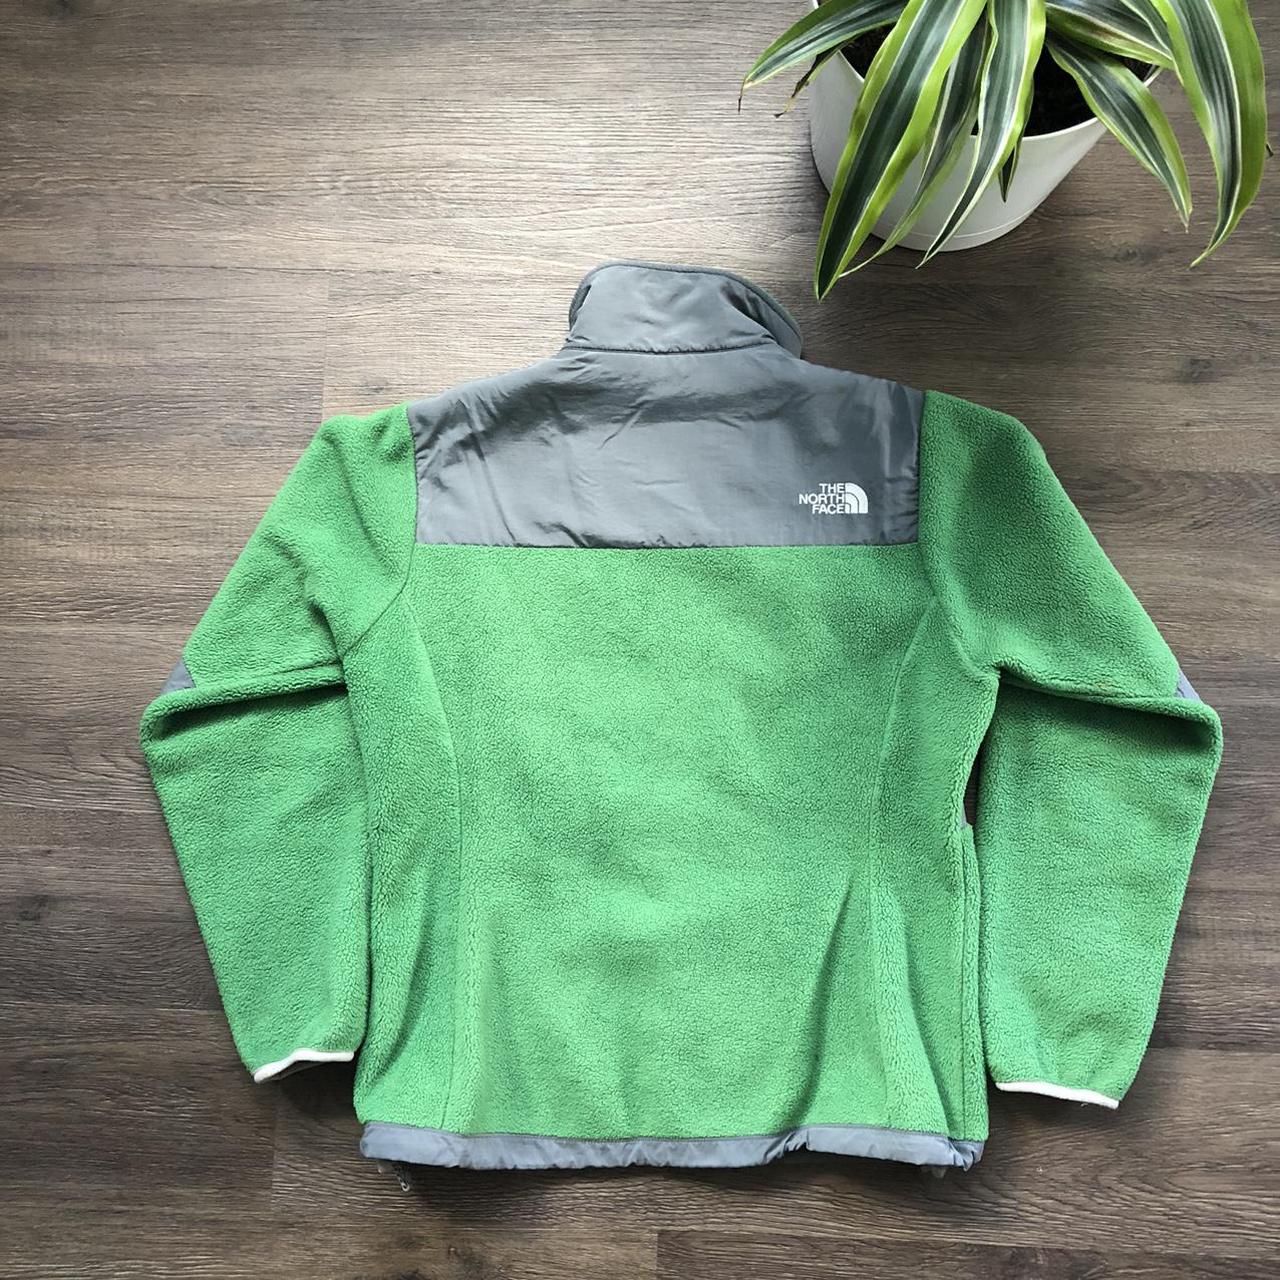 The North Face Women's Grey and Green Jacket (2)